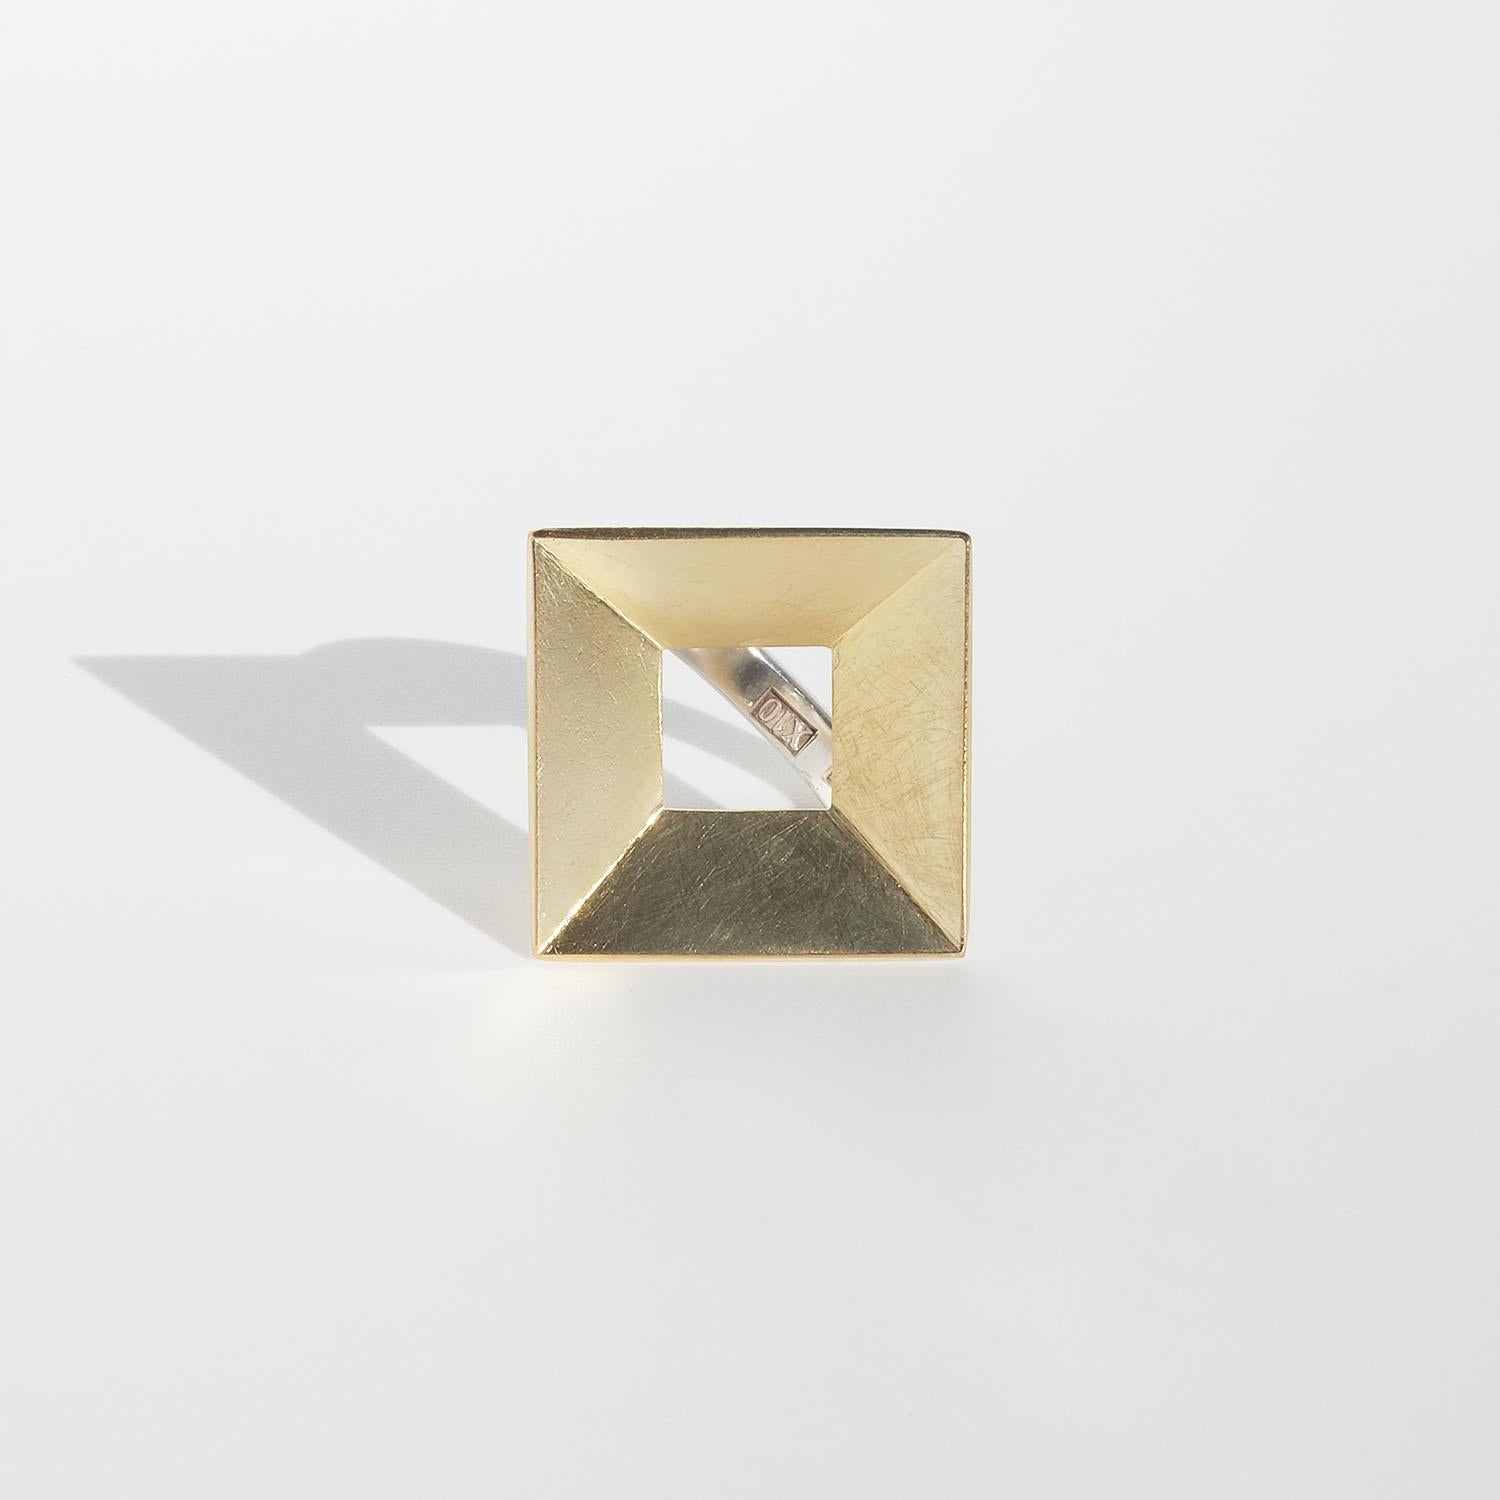 This sterling silver ring is adorned with a 18 karat gold, twisted square creation.

The twisted square resembles an art frame in which your finger will form the motif. This is a ring you can wear anytime and always.

Marie Fernström is a Swedish